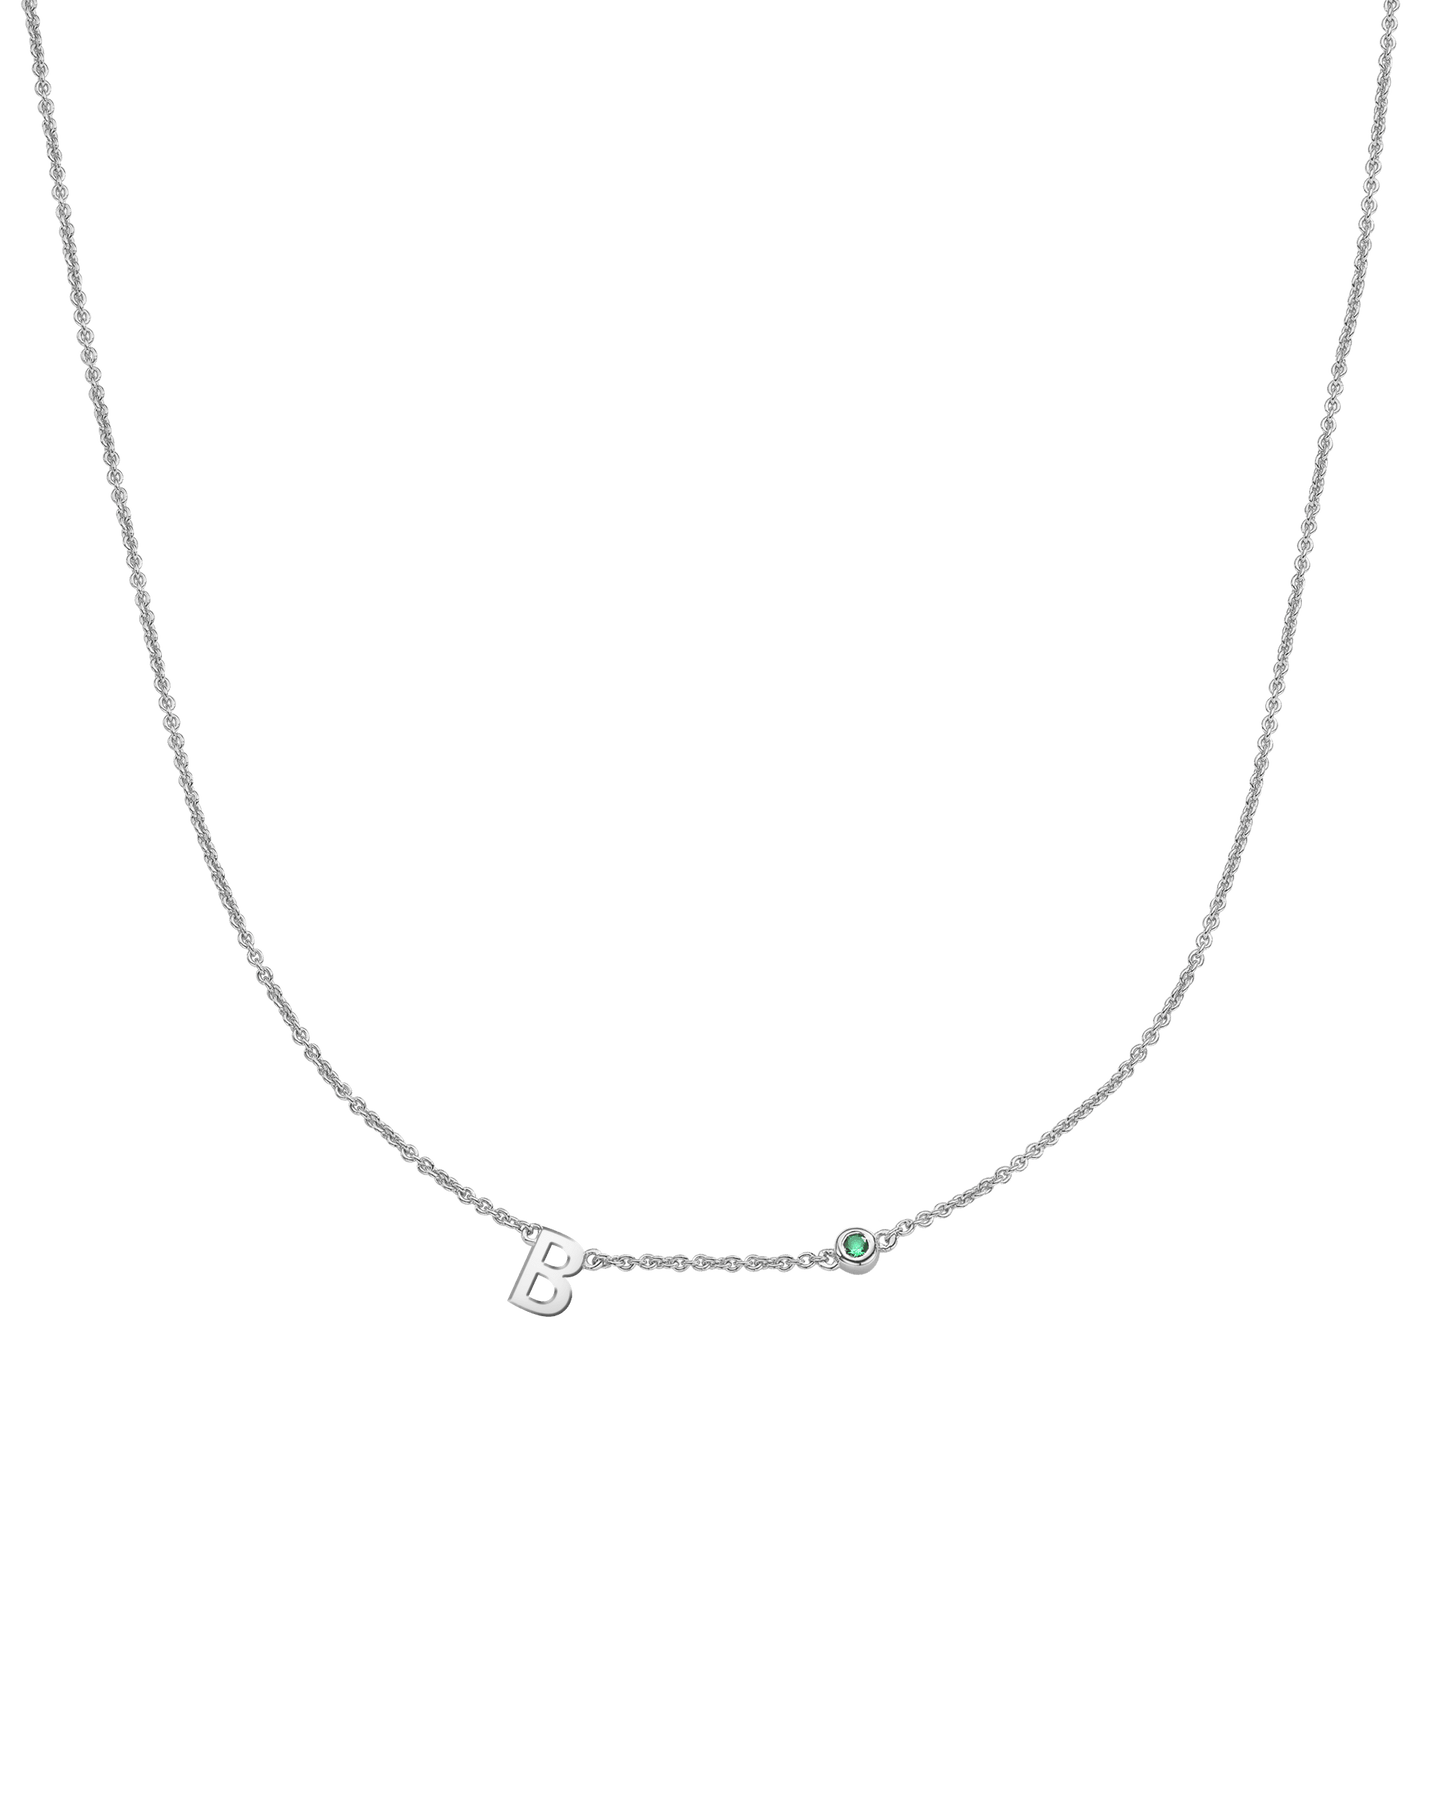 Initial Birthstone Necklace - 925 Sterling Silver Necklaces magal-dev 1 Initial + 1 Birthstone Adjustable 16-17" (40cm-43cm) 